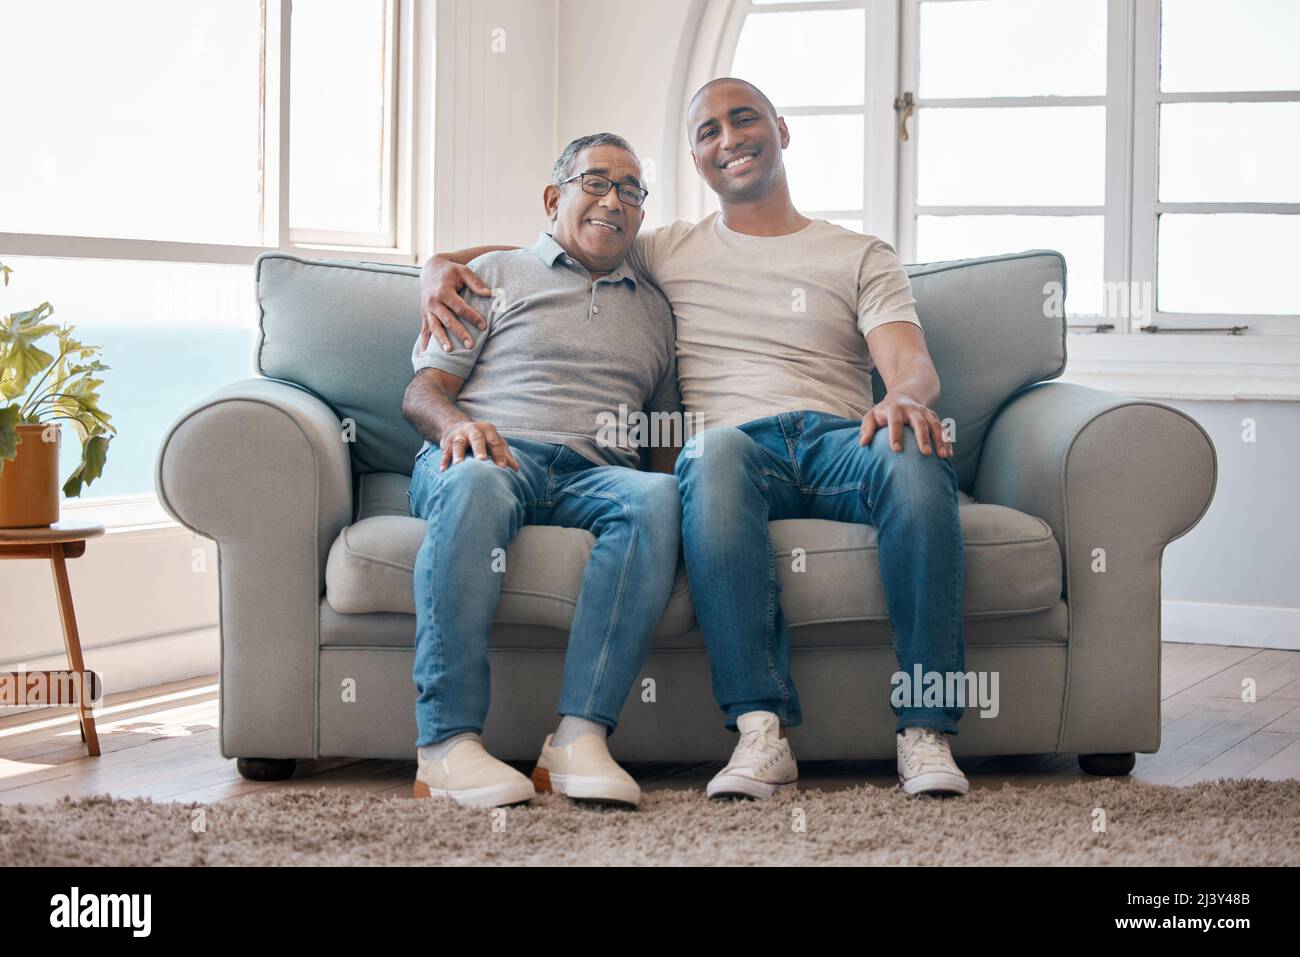 Seeing my son grow into a man. Shot of a young man spending time with his father. Stock Photo